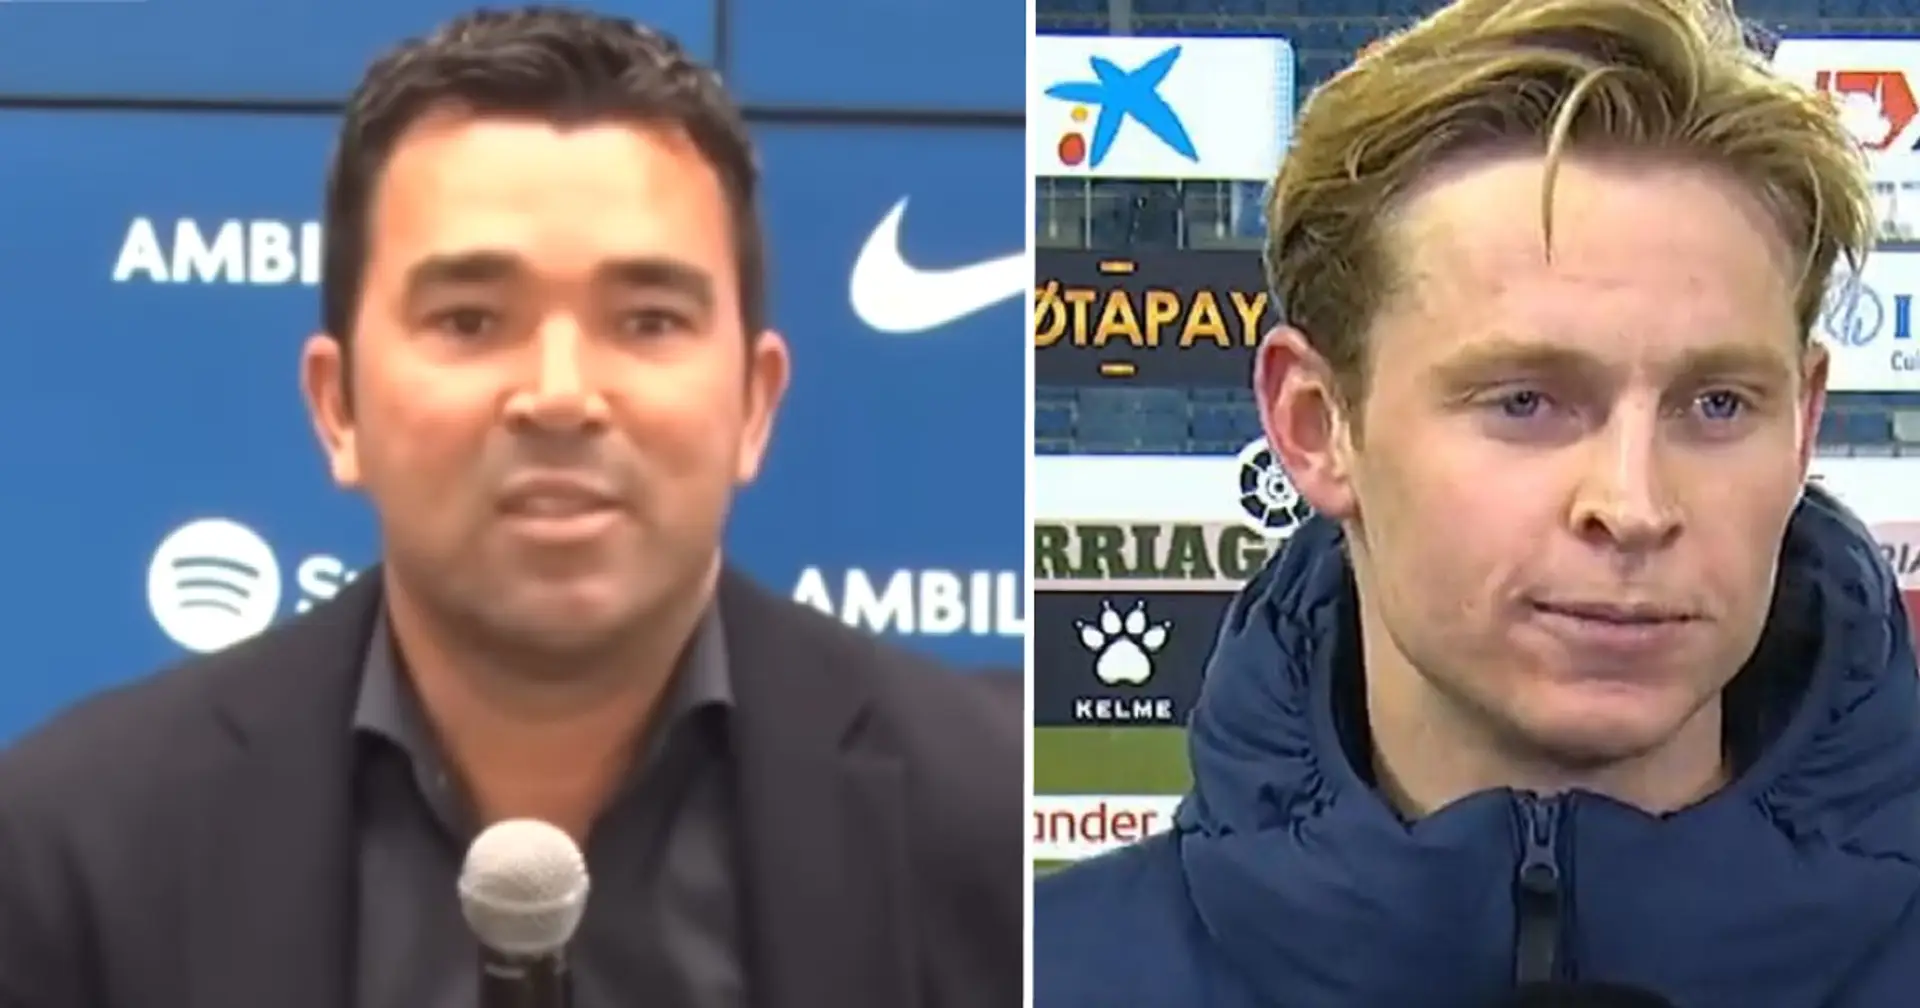 REVEALED: What Deco told De Jong after unfortunate injury that left midfielder on crutches